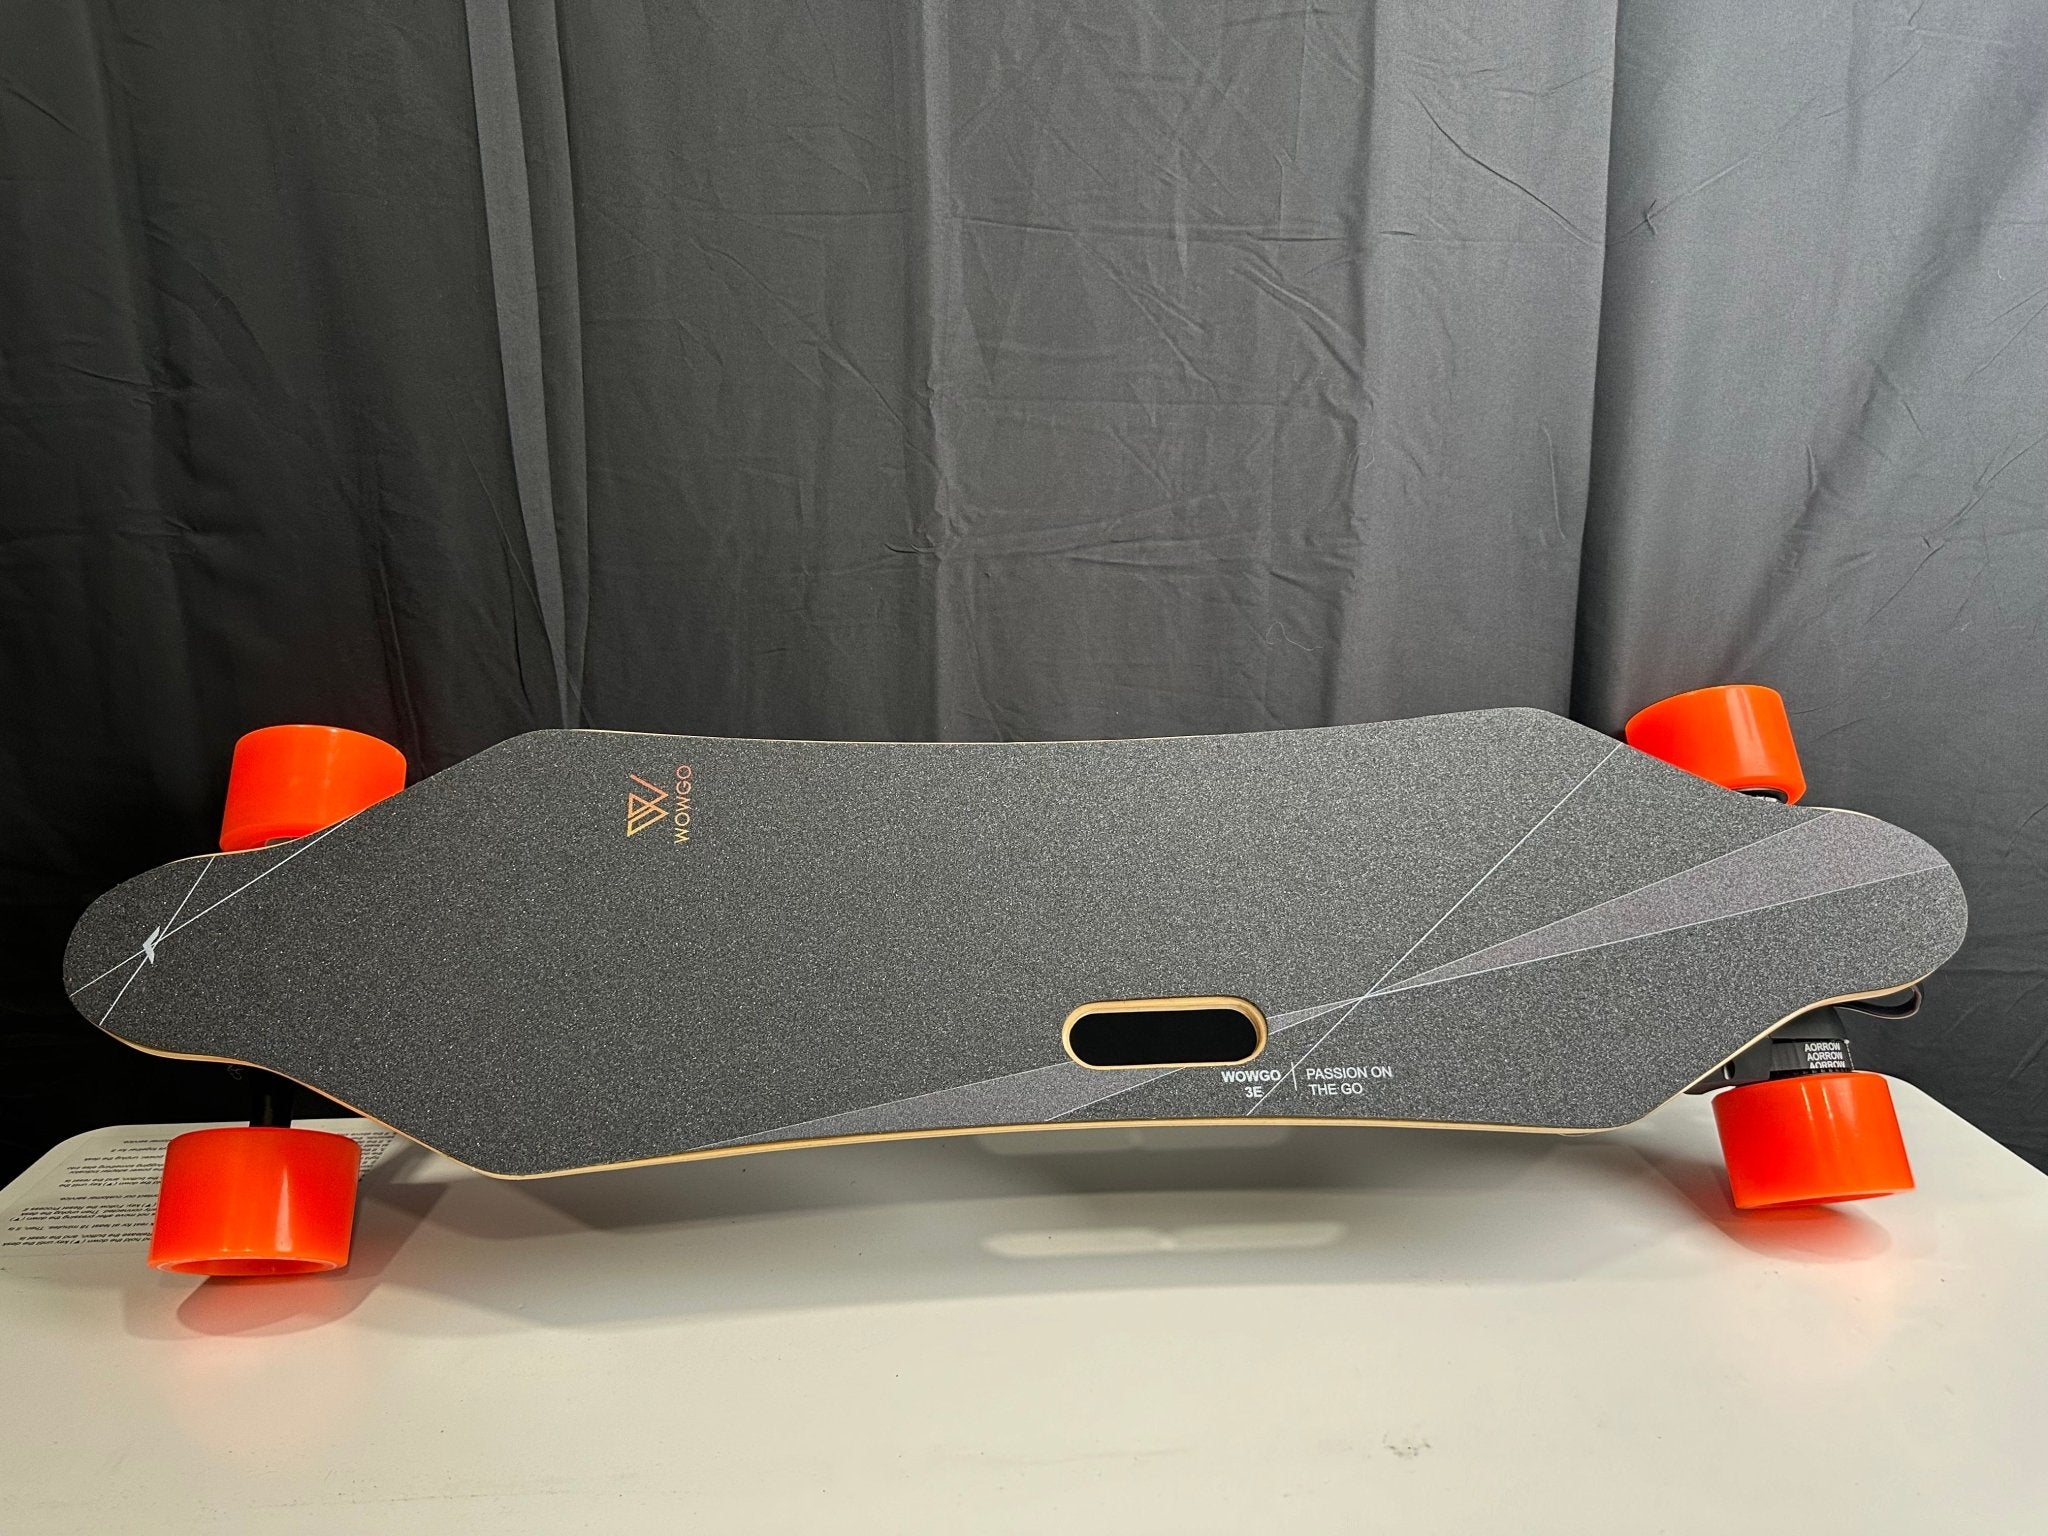 WowGo Refurbished Electric Skateboard (Only For US Customers) - WOWGO BOARD